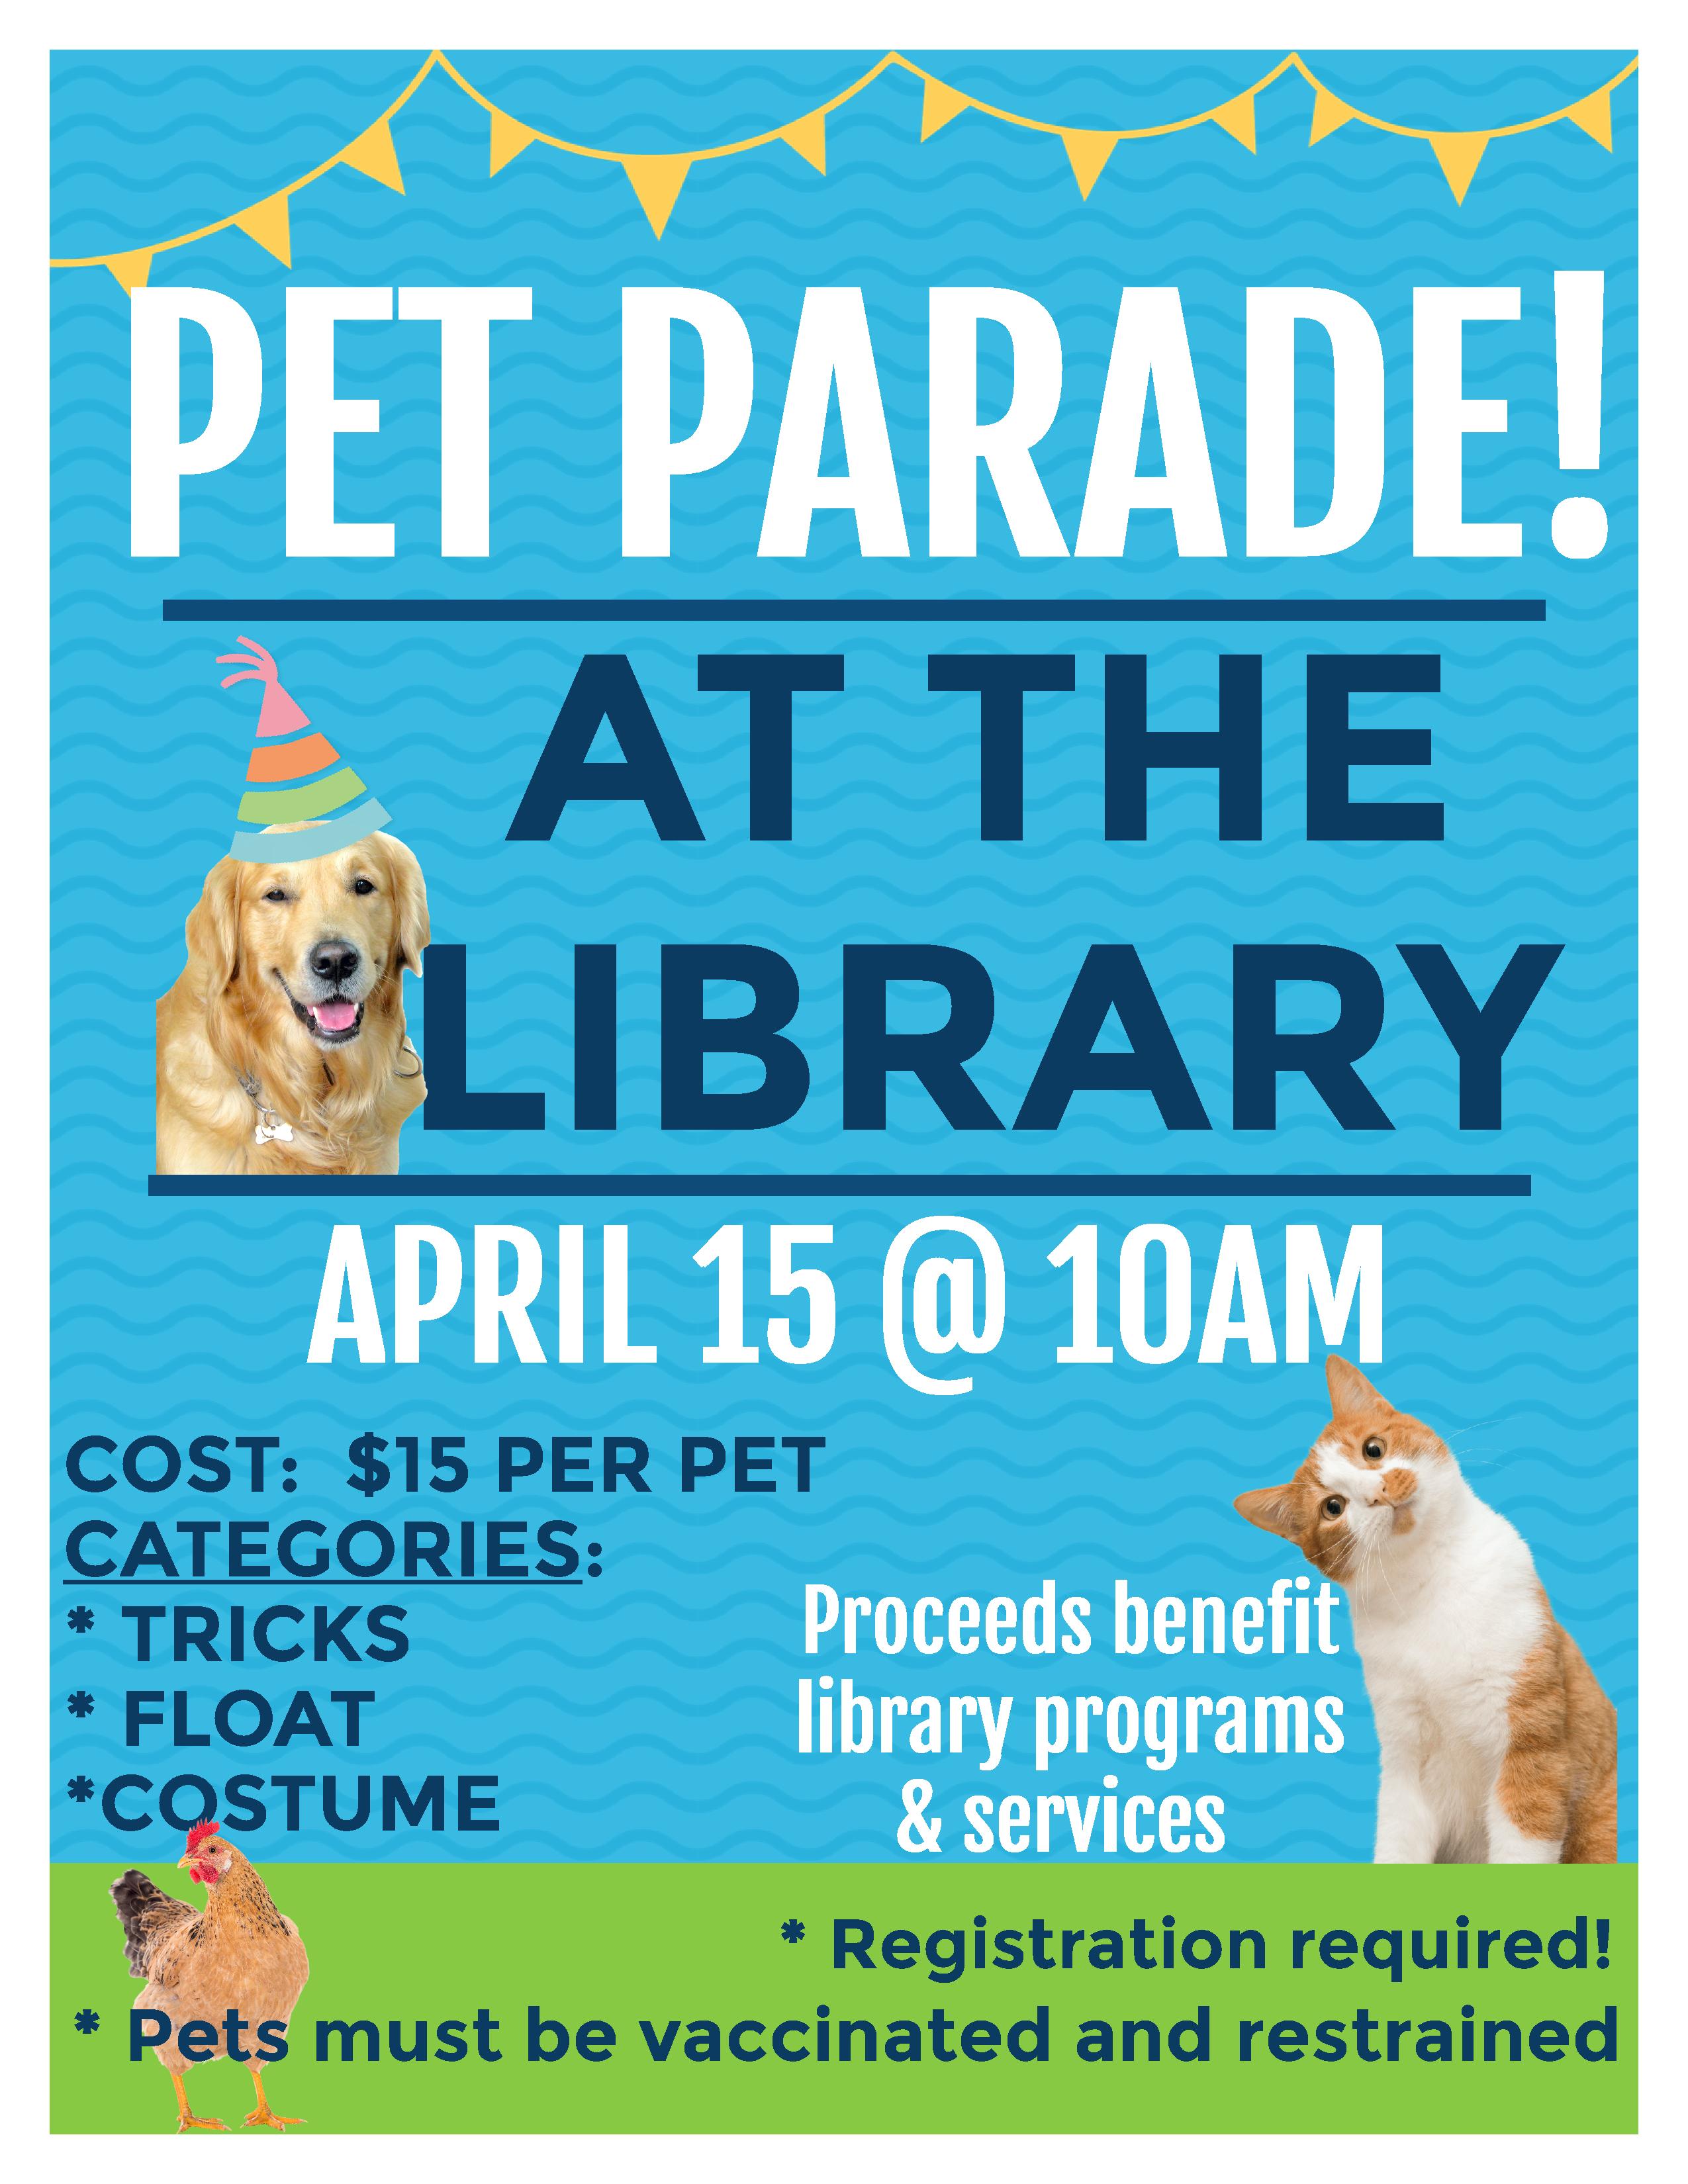 flyer for April 15 Pet Parade at the library